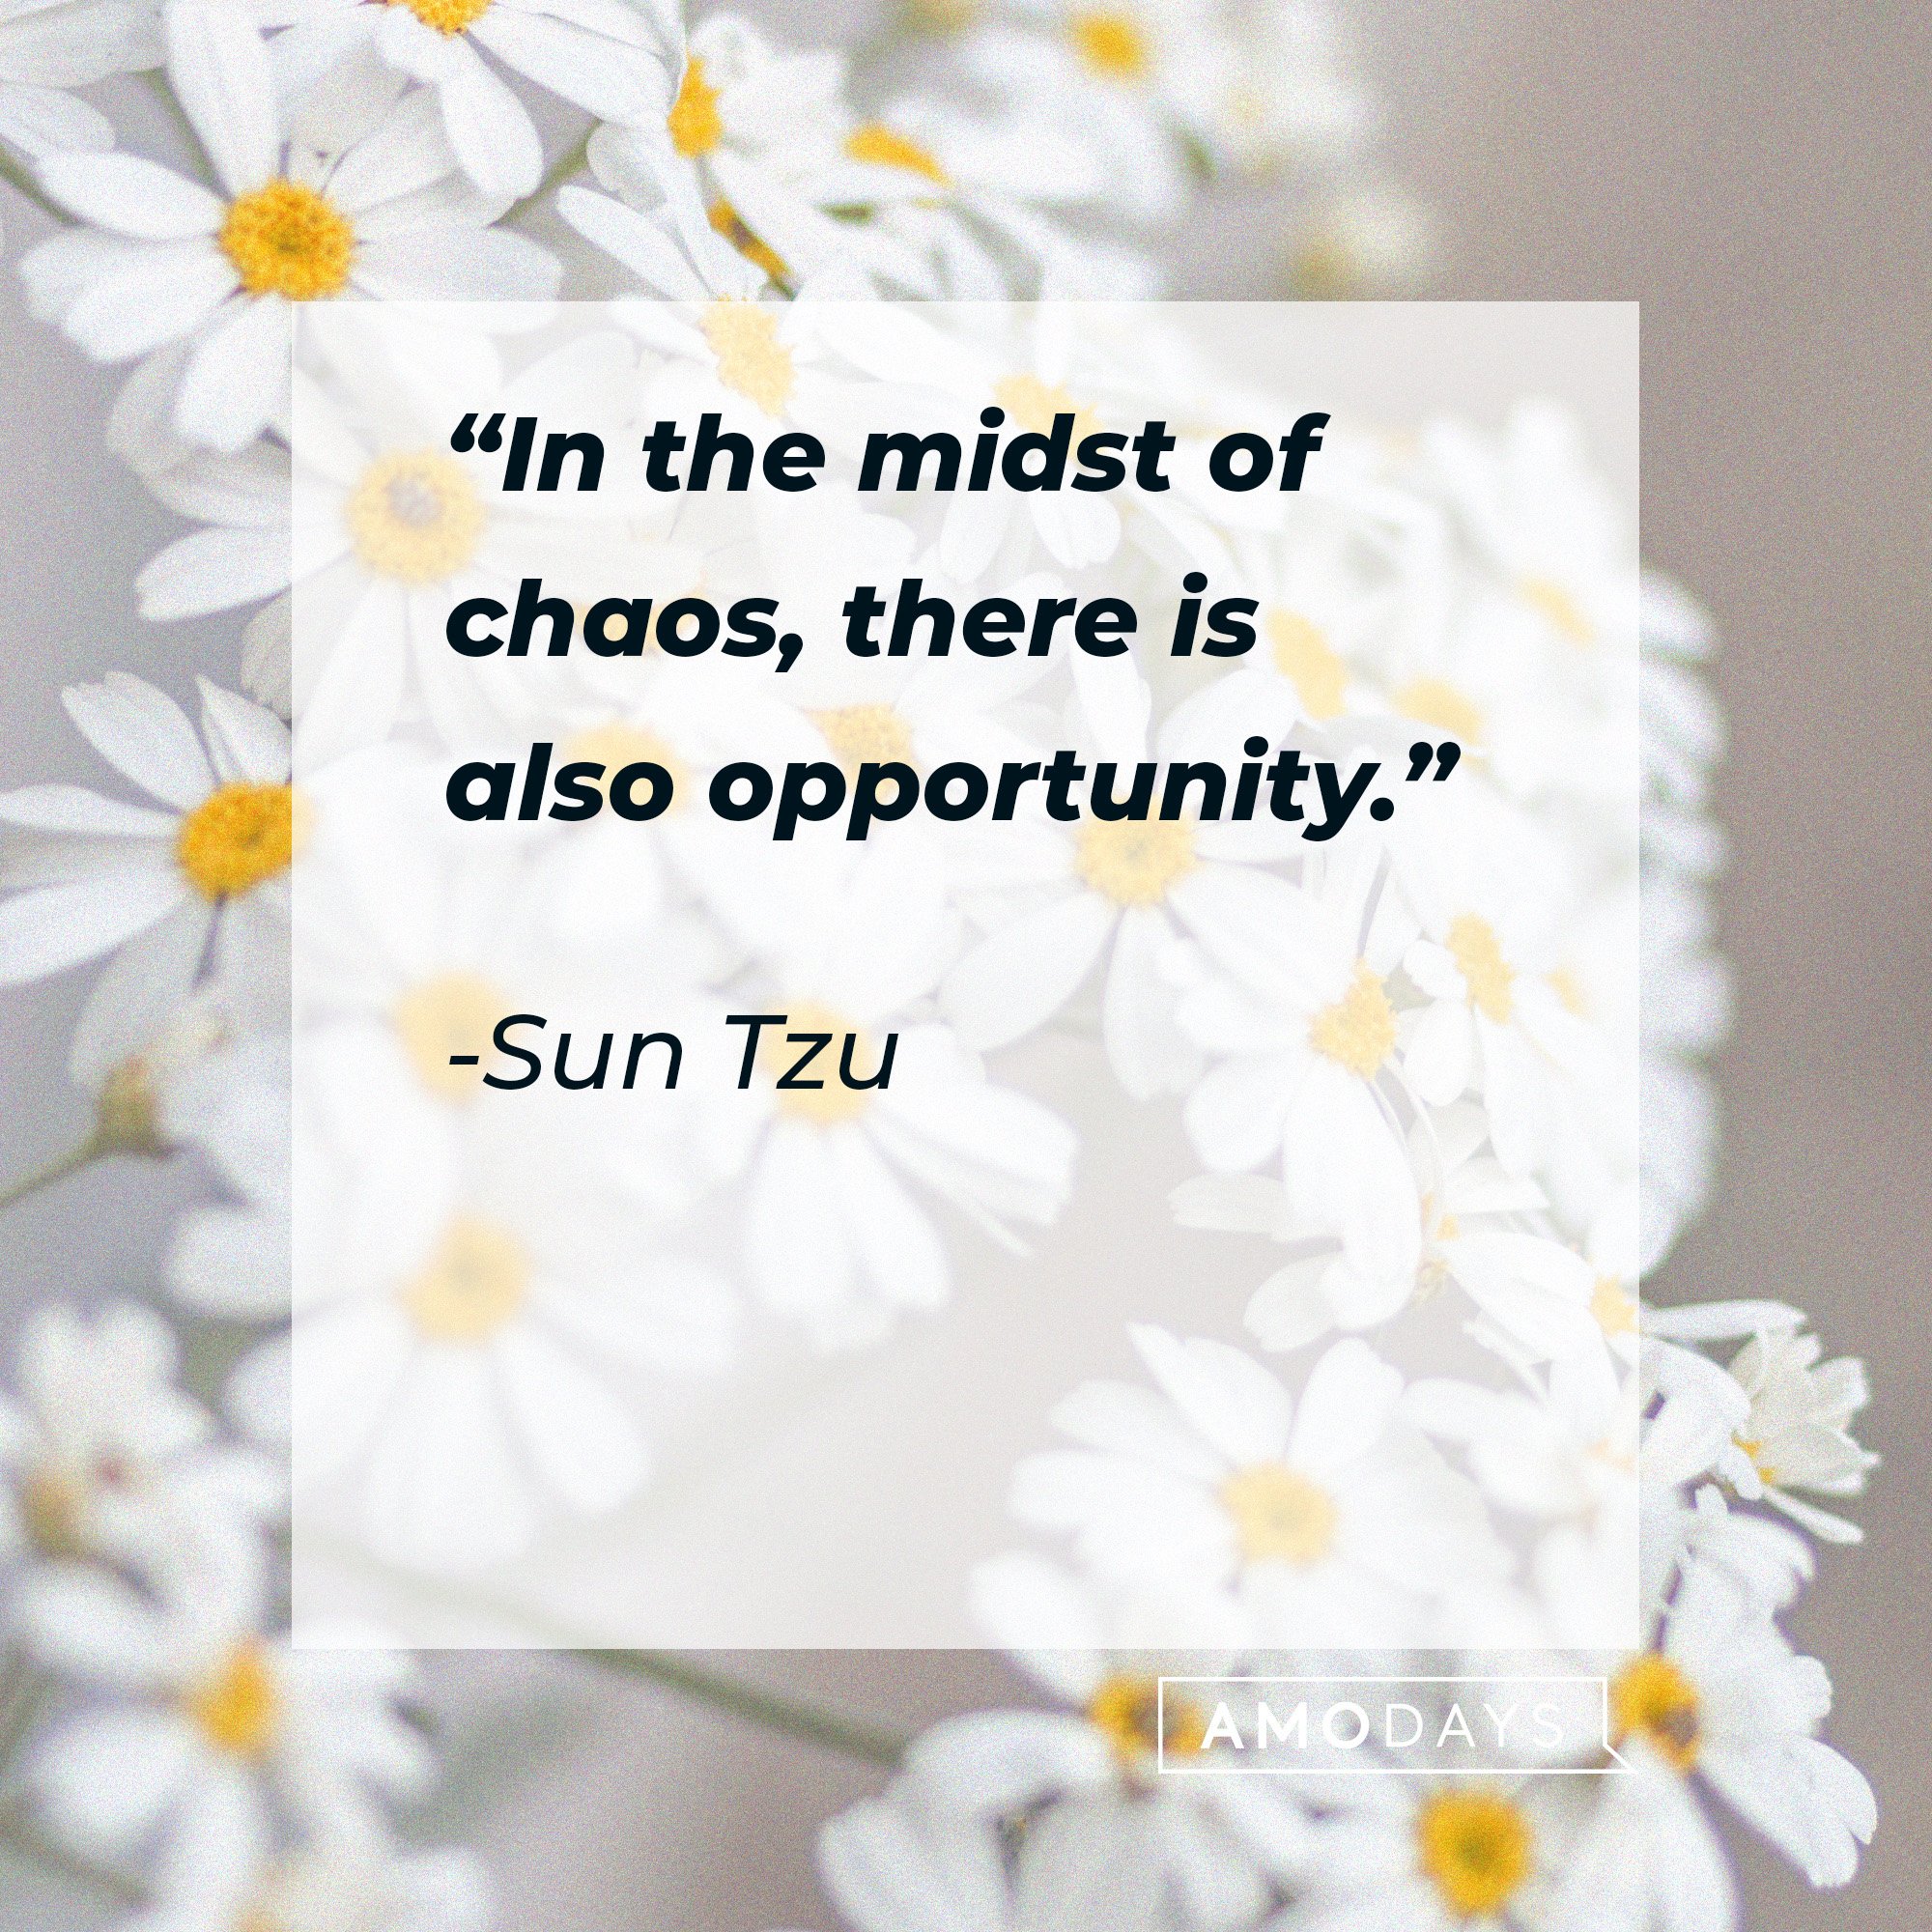 Sun Tzu's quote: “In the midst of chaos, there is also opportunity.” | Image: AmoDays